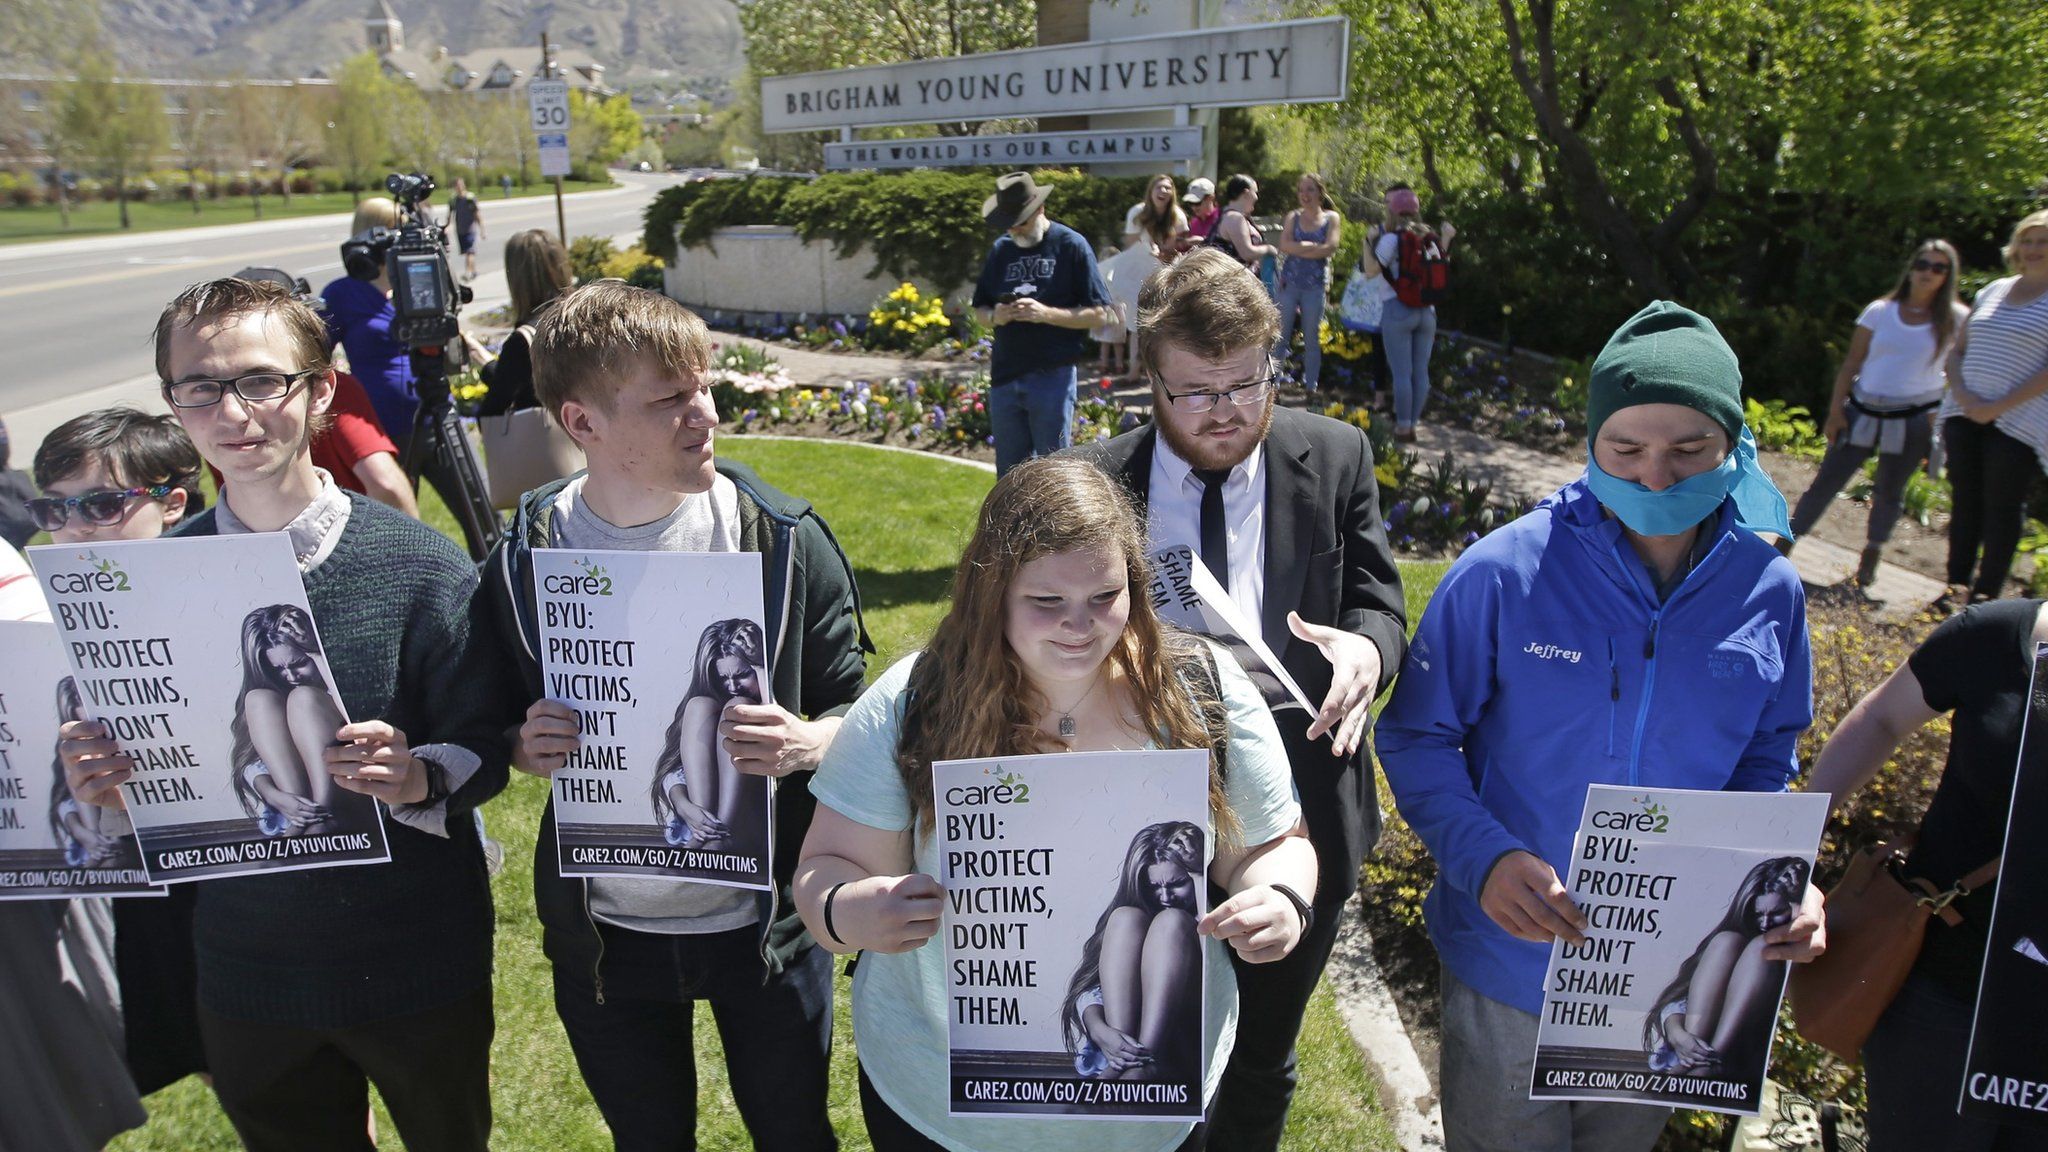 Protesters stand in solidarity with rape victims on the campus of Brigham Young University during a sexual assault awareness demonstration Wednesday, 20 April 2016, in Provo, Utah